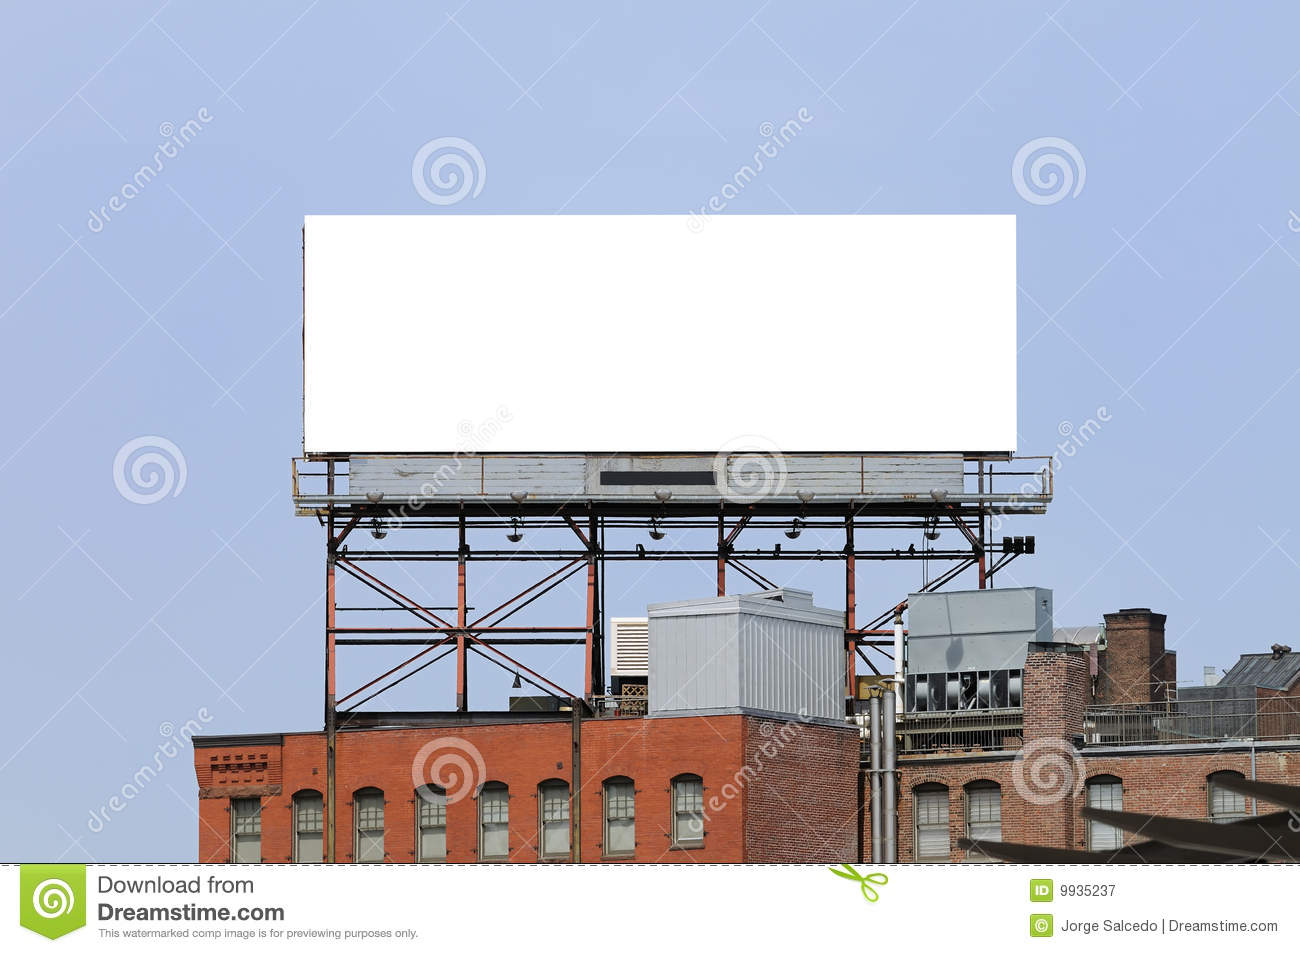 Bank Commercial Sign On Roof Of Brick Building  Large Billboard In The